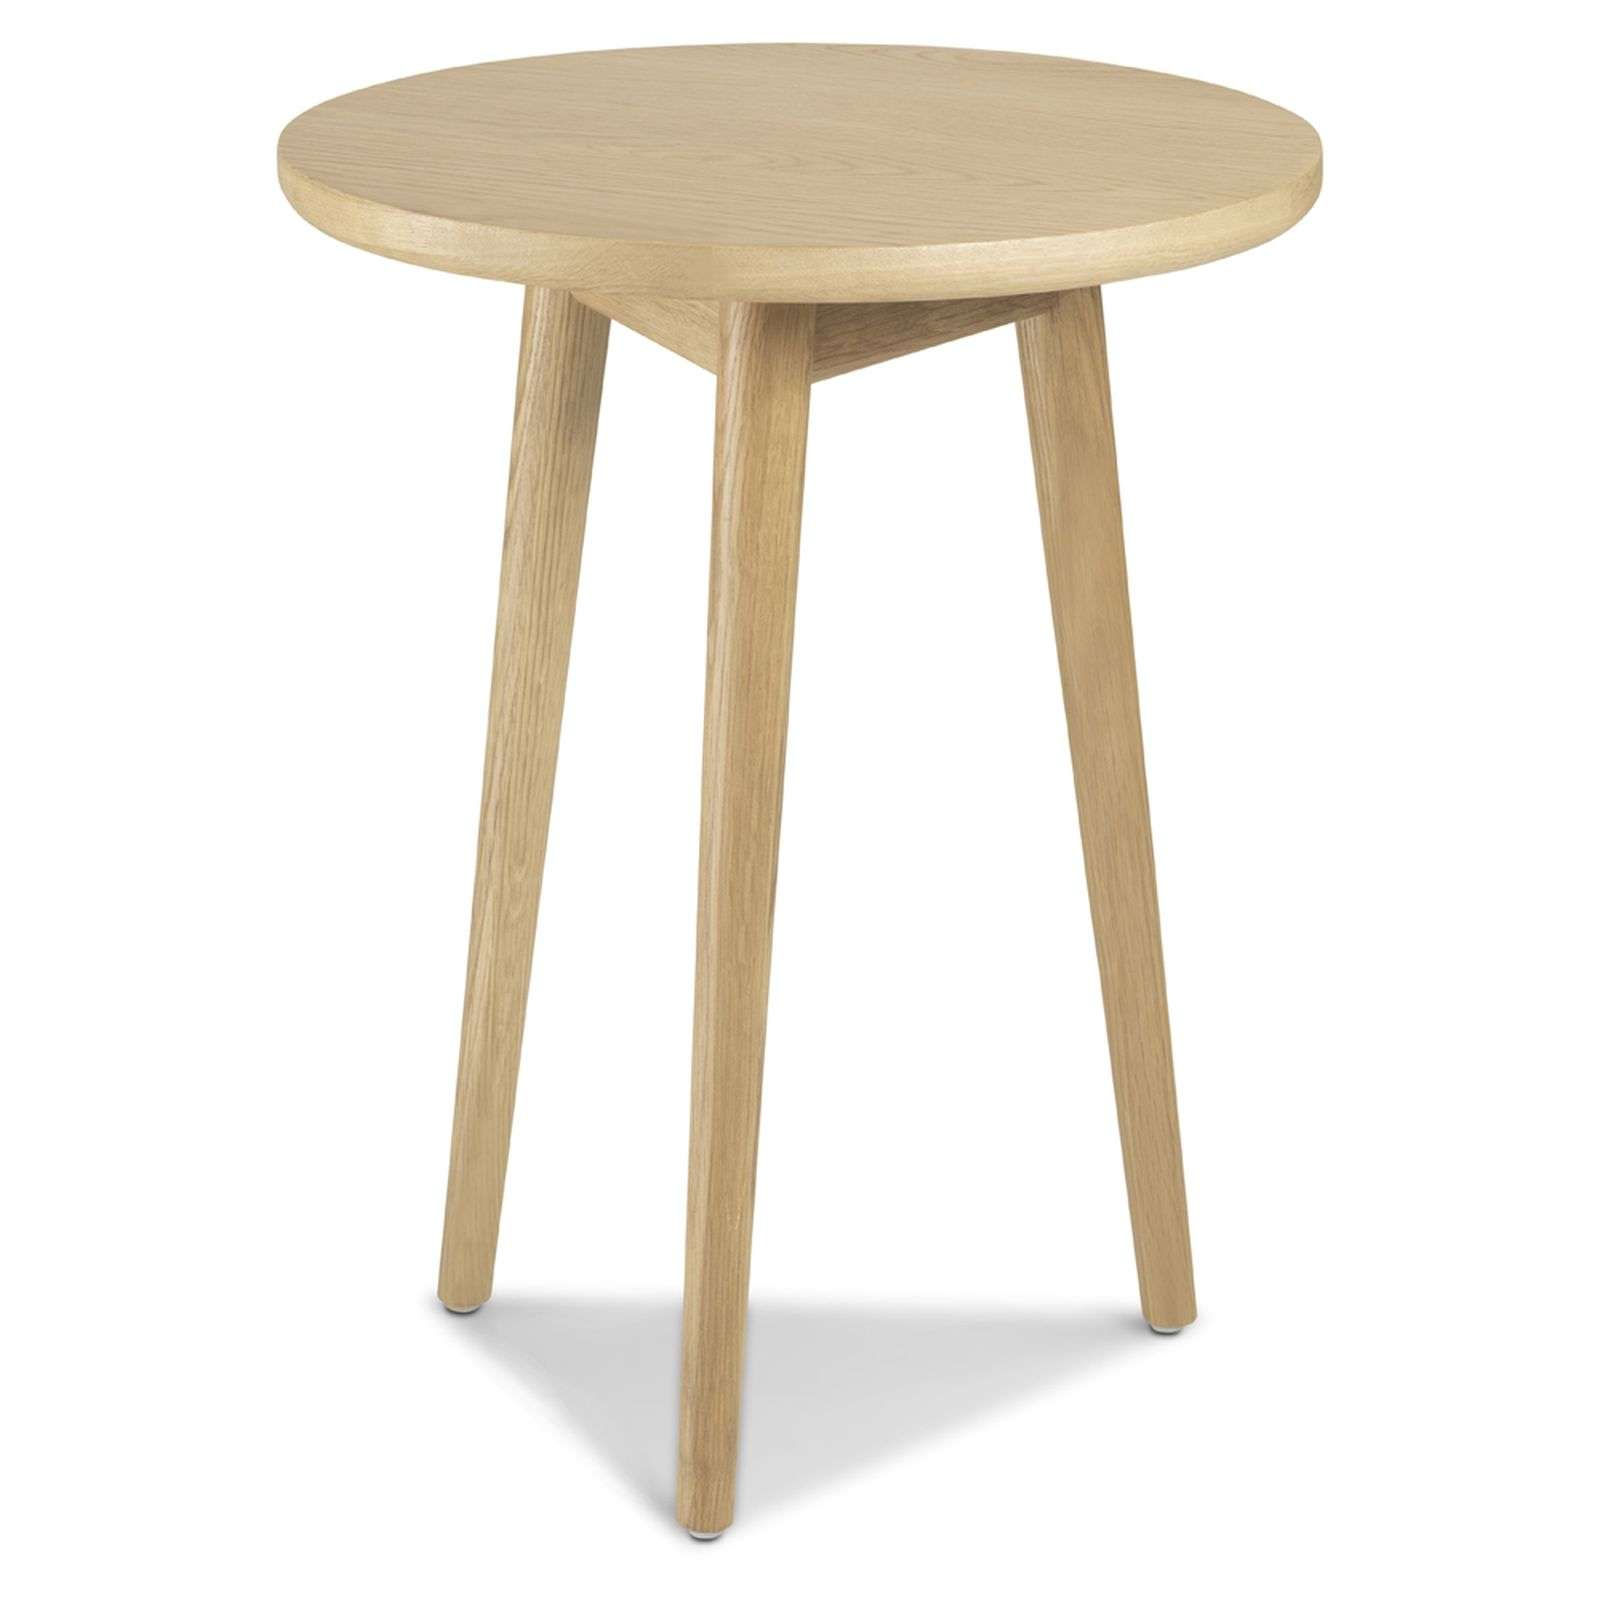 Belfry Solid Oak Round Lamp Table, Traditional Round Lamp Tables